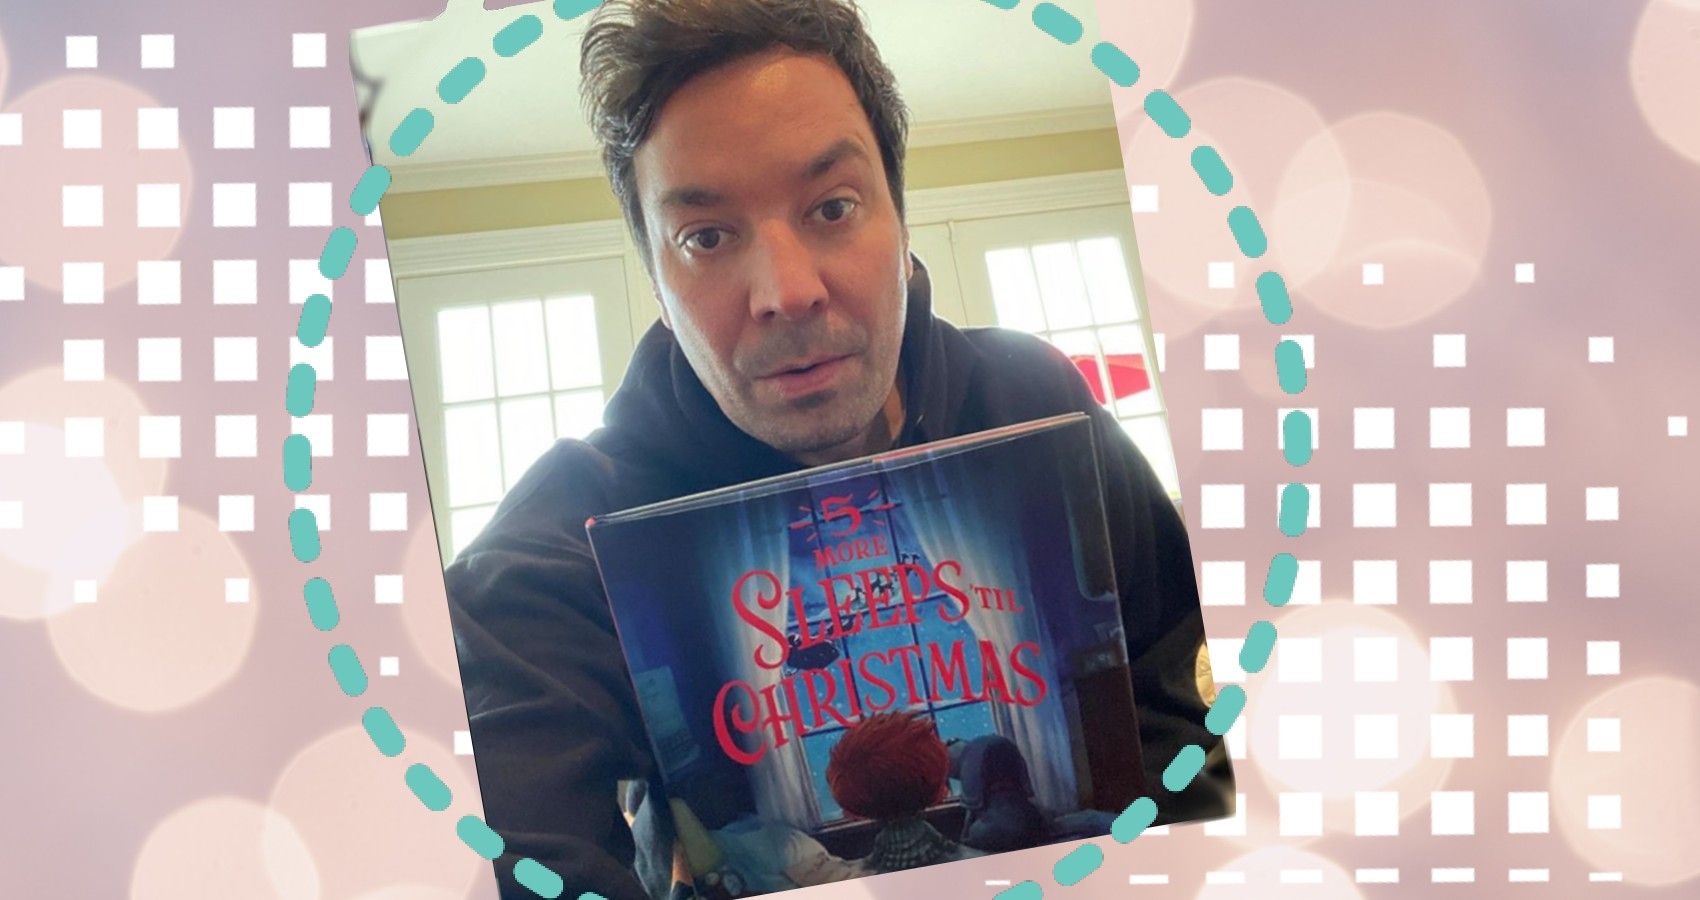 Jimmy Fallon Channels His Love Of Christmas Into A Children's Book